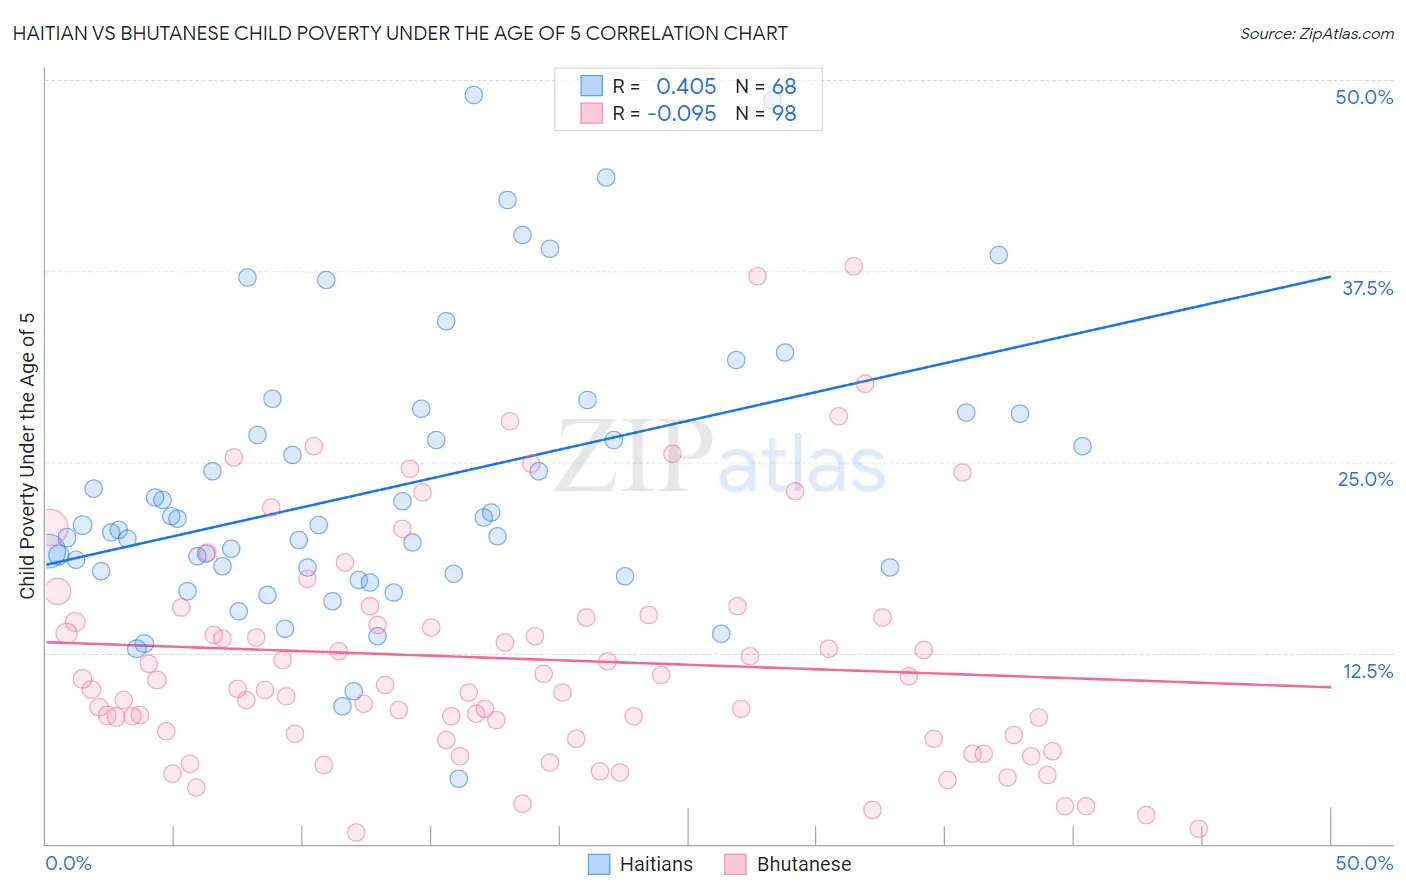 Haitian vs Bhutanese Child Poverty Under the Age of 5